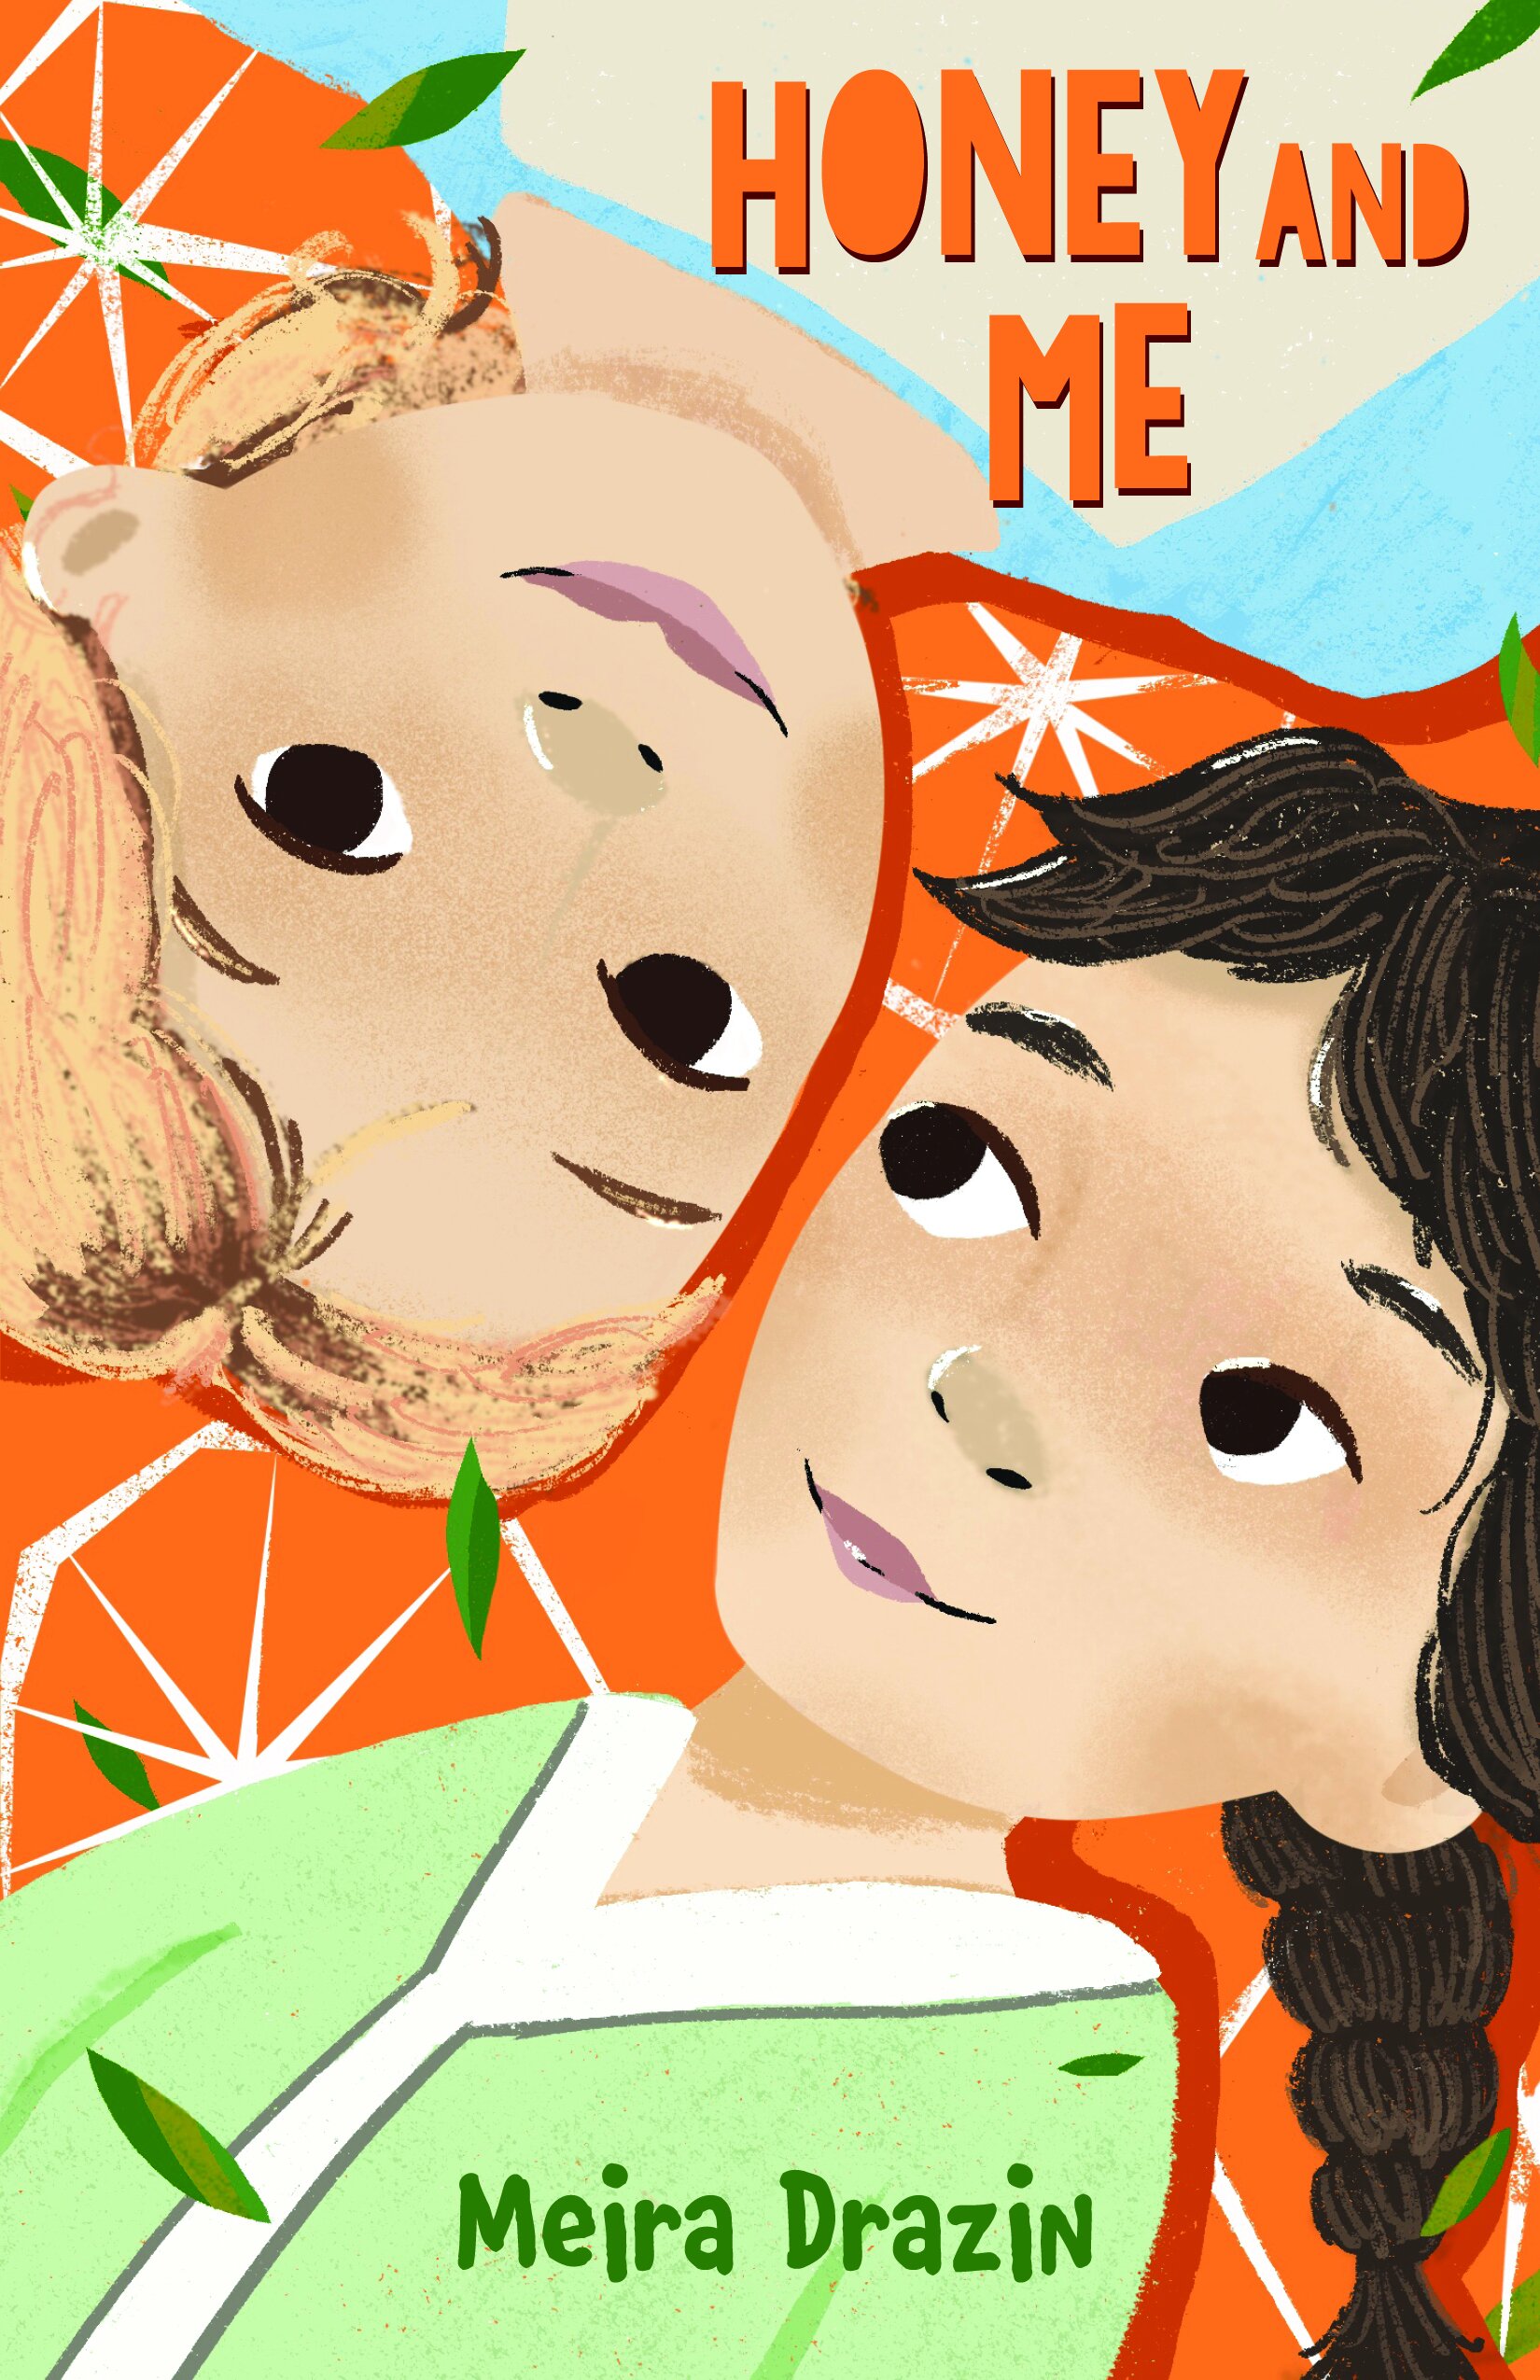 HONEY AND ME _front cover.jpg